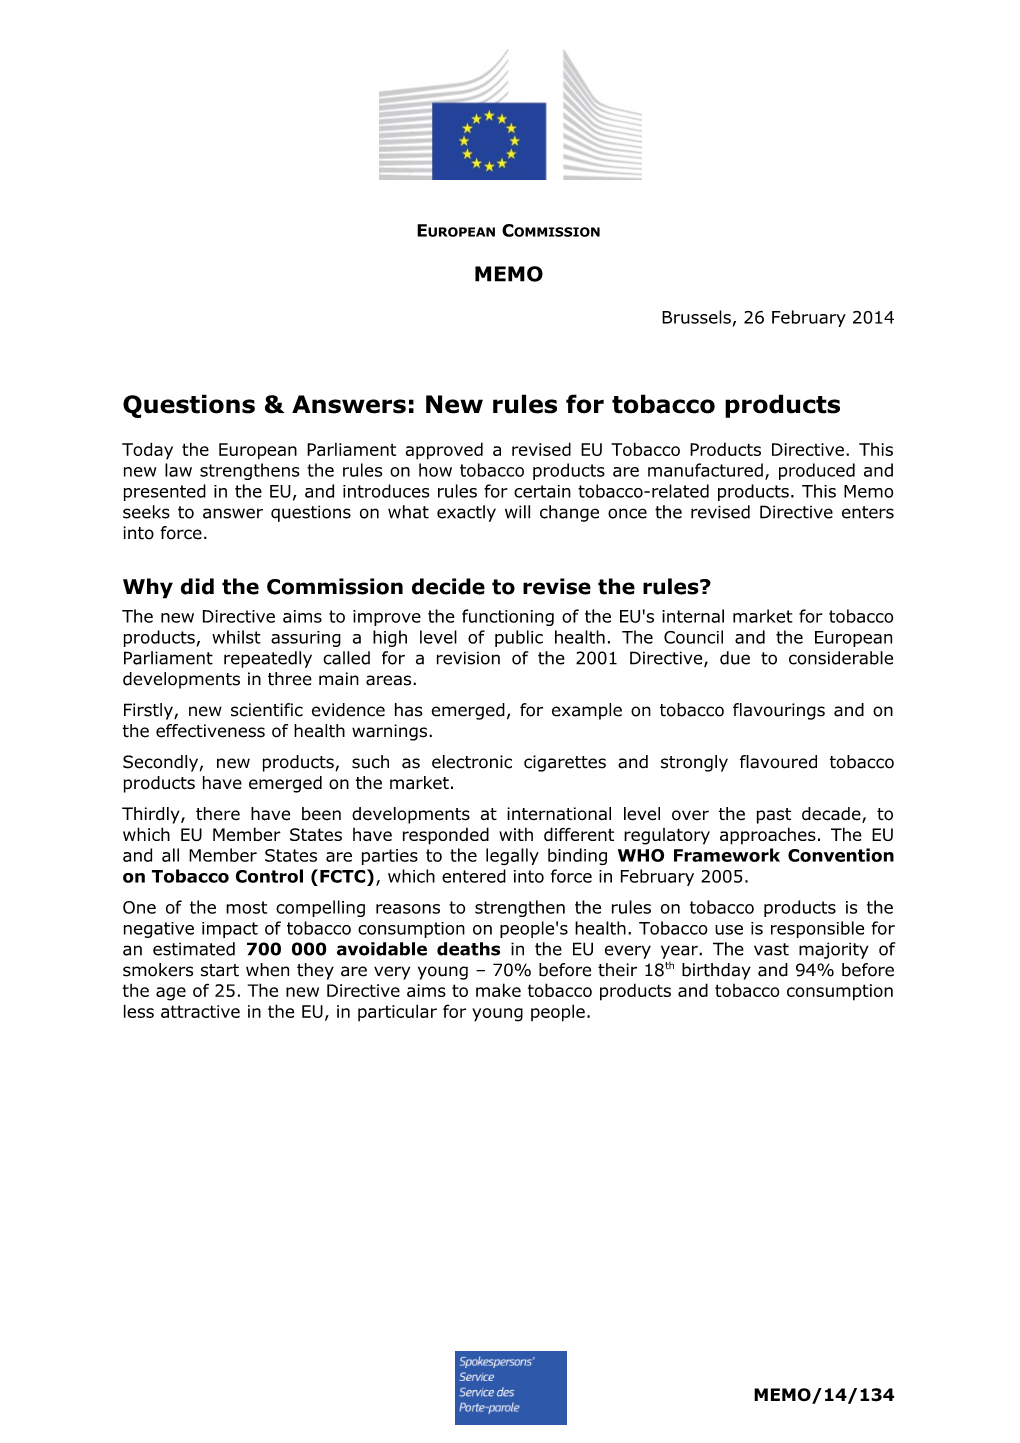 Questions & Answers: New Rules for Tobacco Products